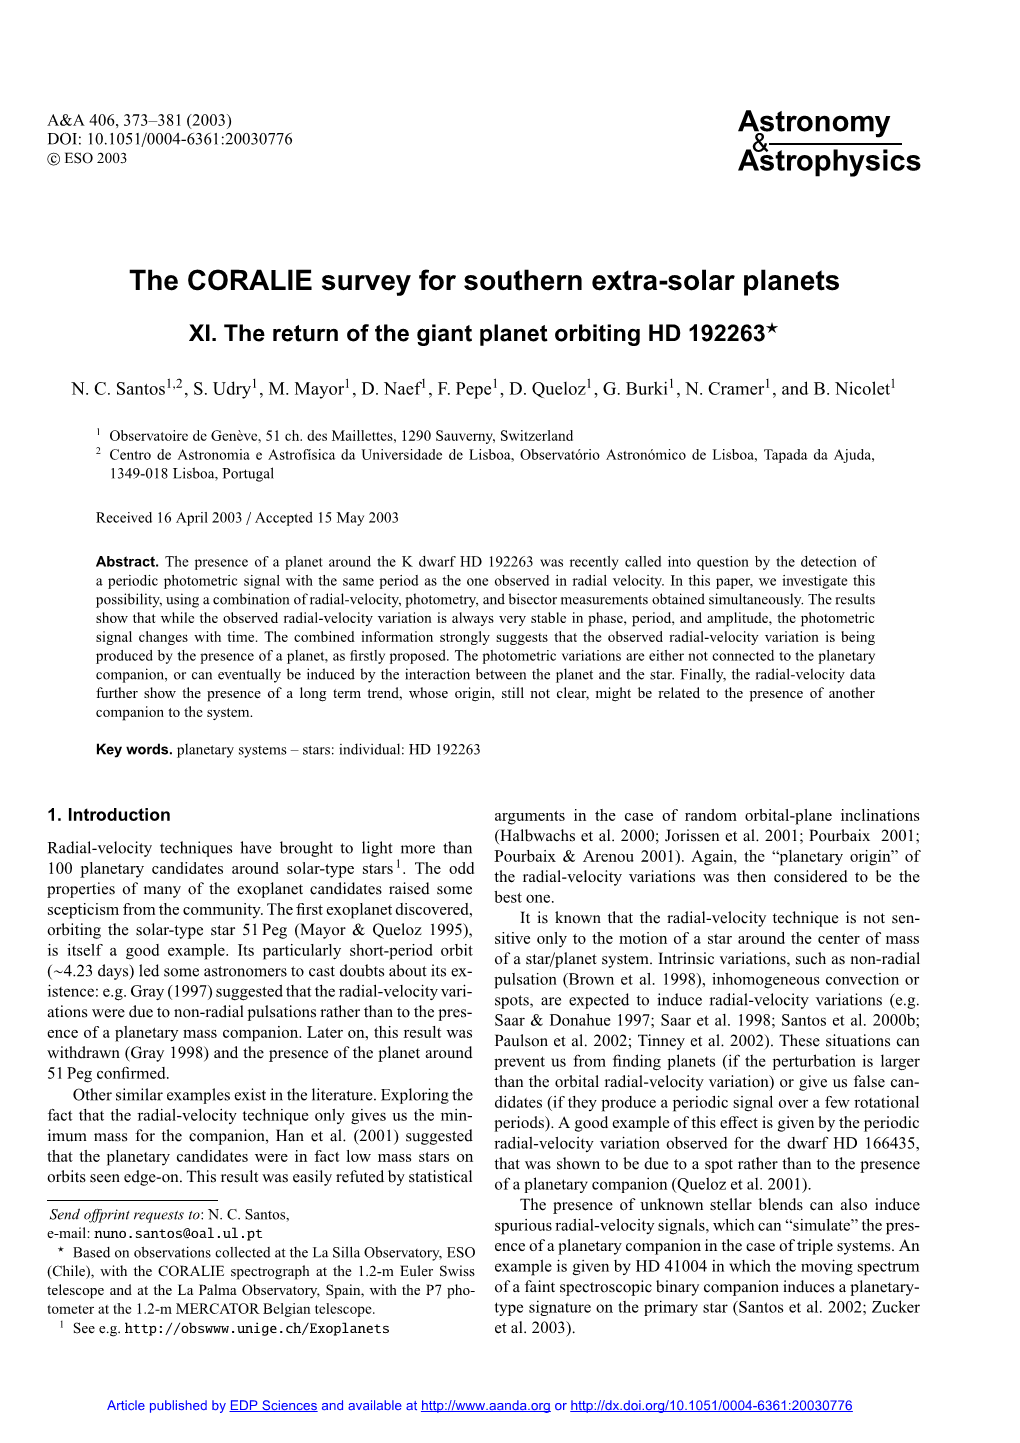 The CORALIE Survey for Southern Extra-Solar Planets